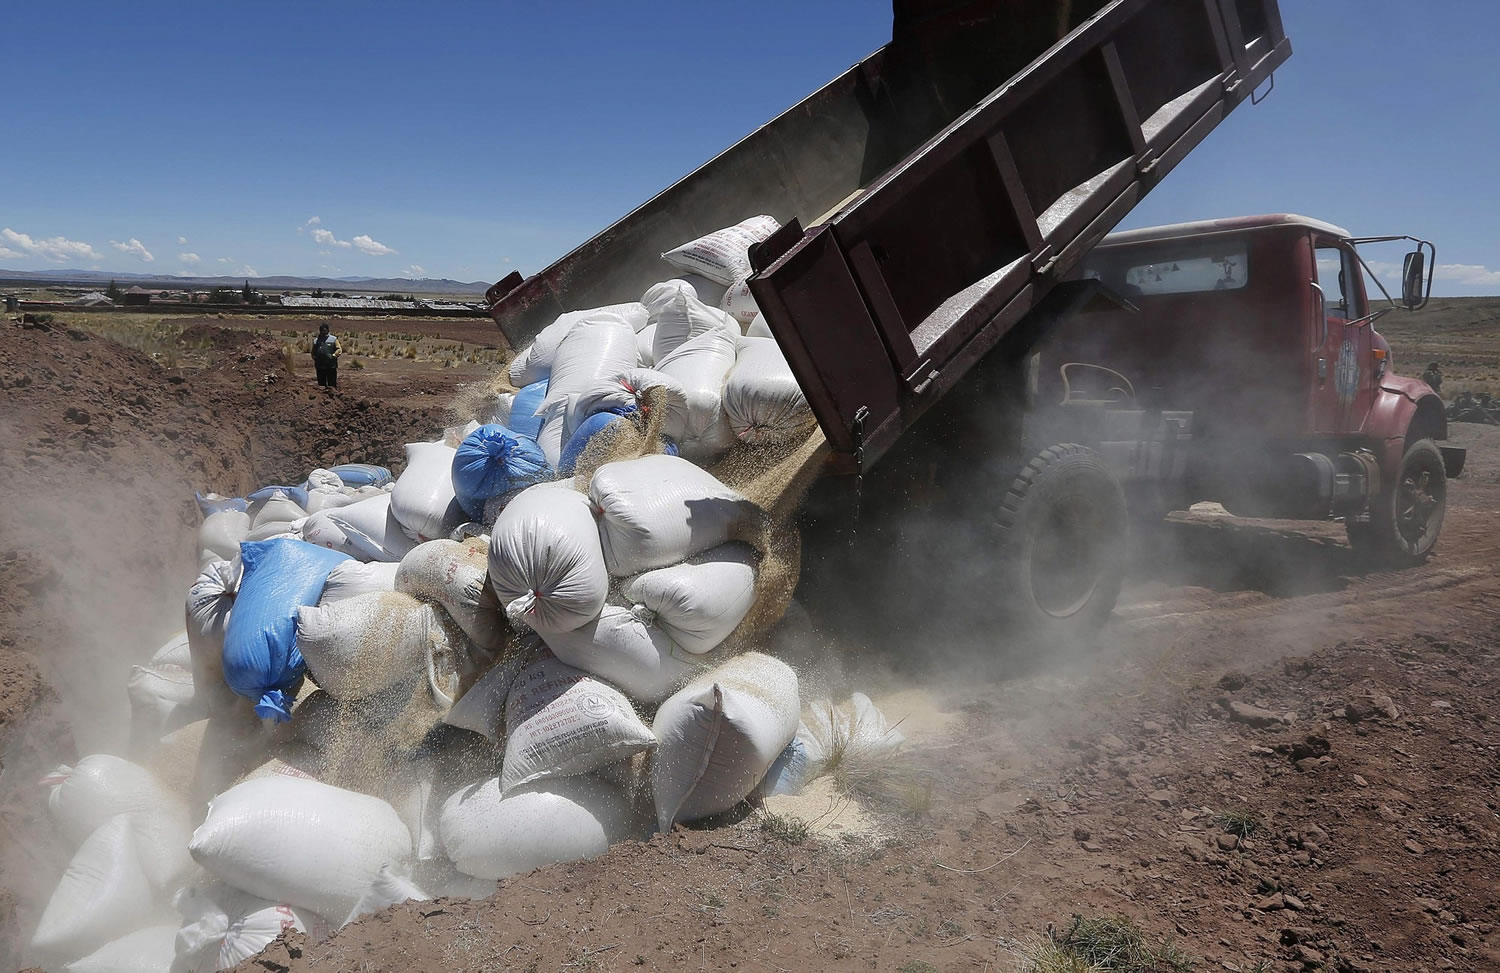 Photos by Juan Karita/Associated Press
A truck dumps Peruvian quinoa to be burned Nov. 7 in Guaqui, Bolivia. Bolivia has started taking a tougher line on cheaper factory-farmed quinoa from Peru, whose higher output stems from an easier coastal climate but also the chemicals its agribusinesses use.